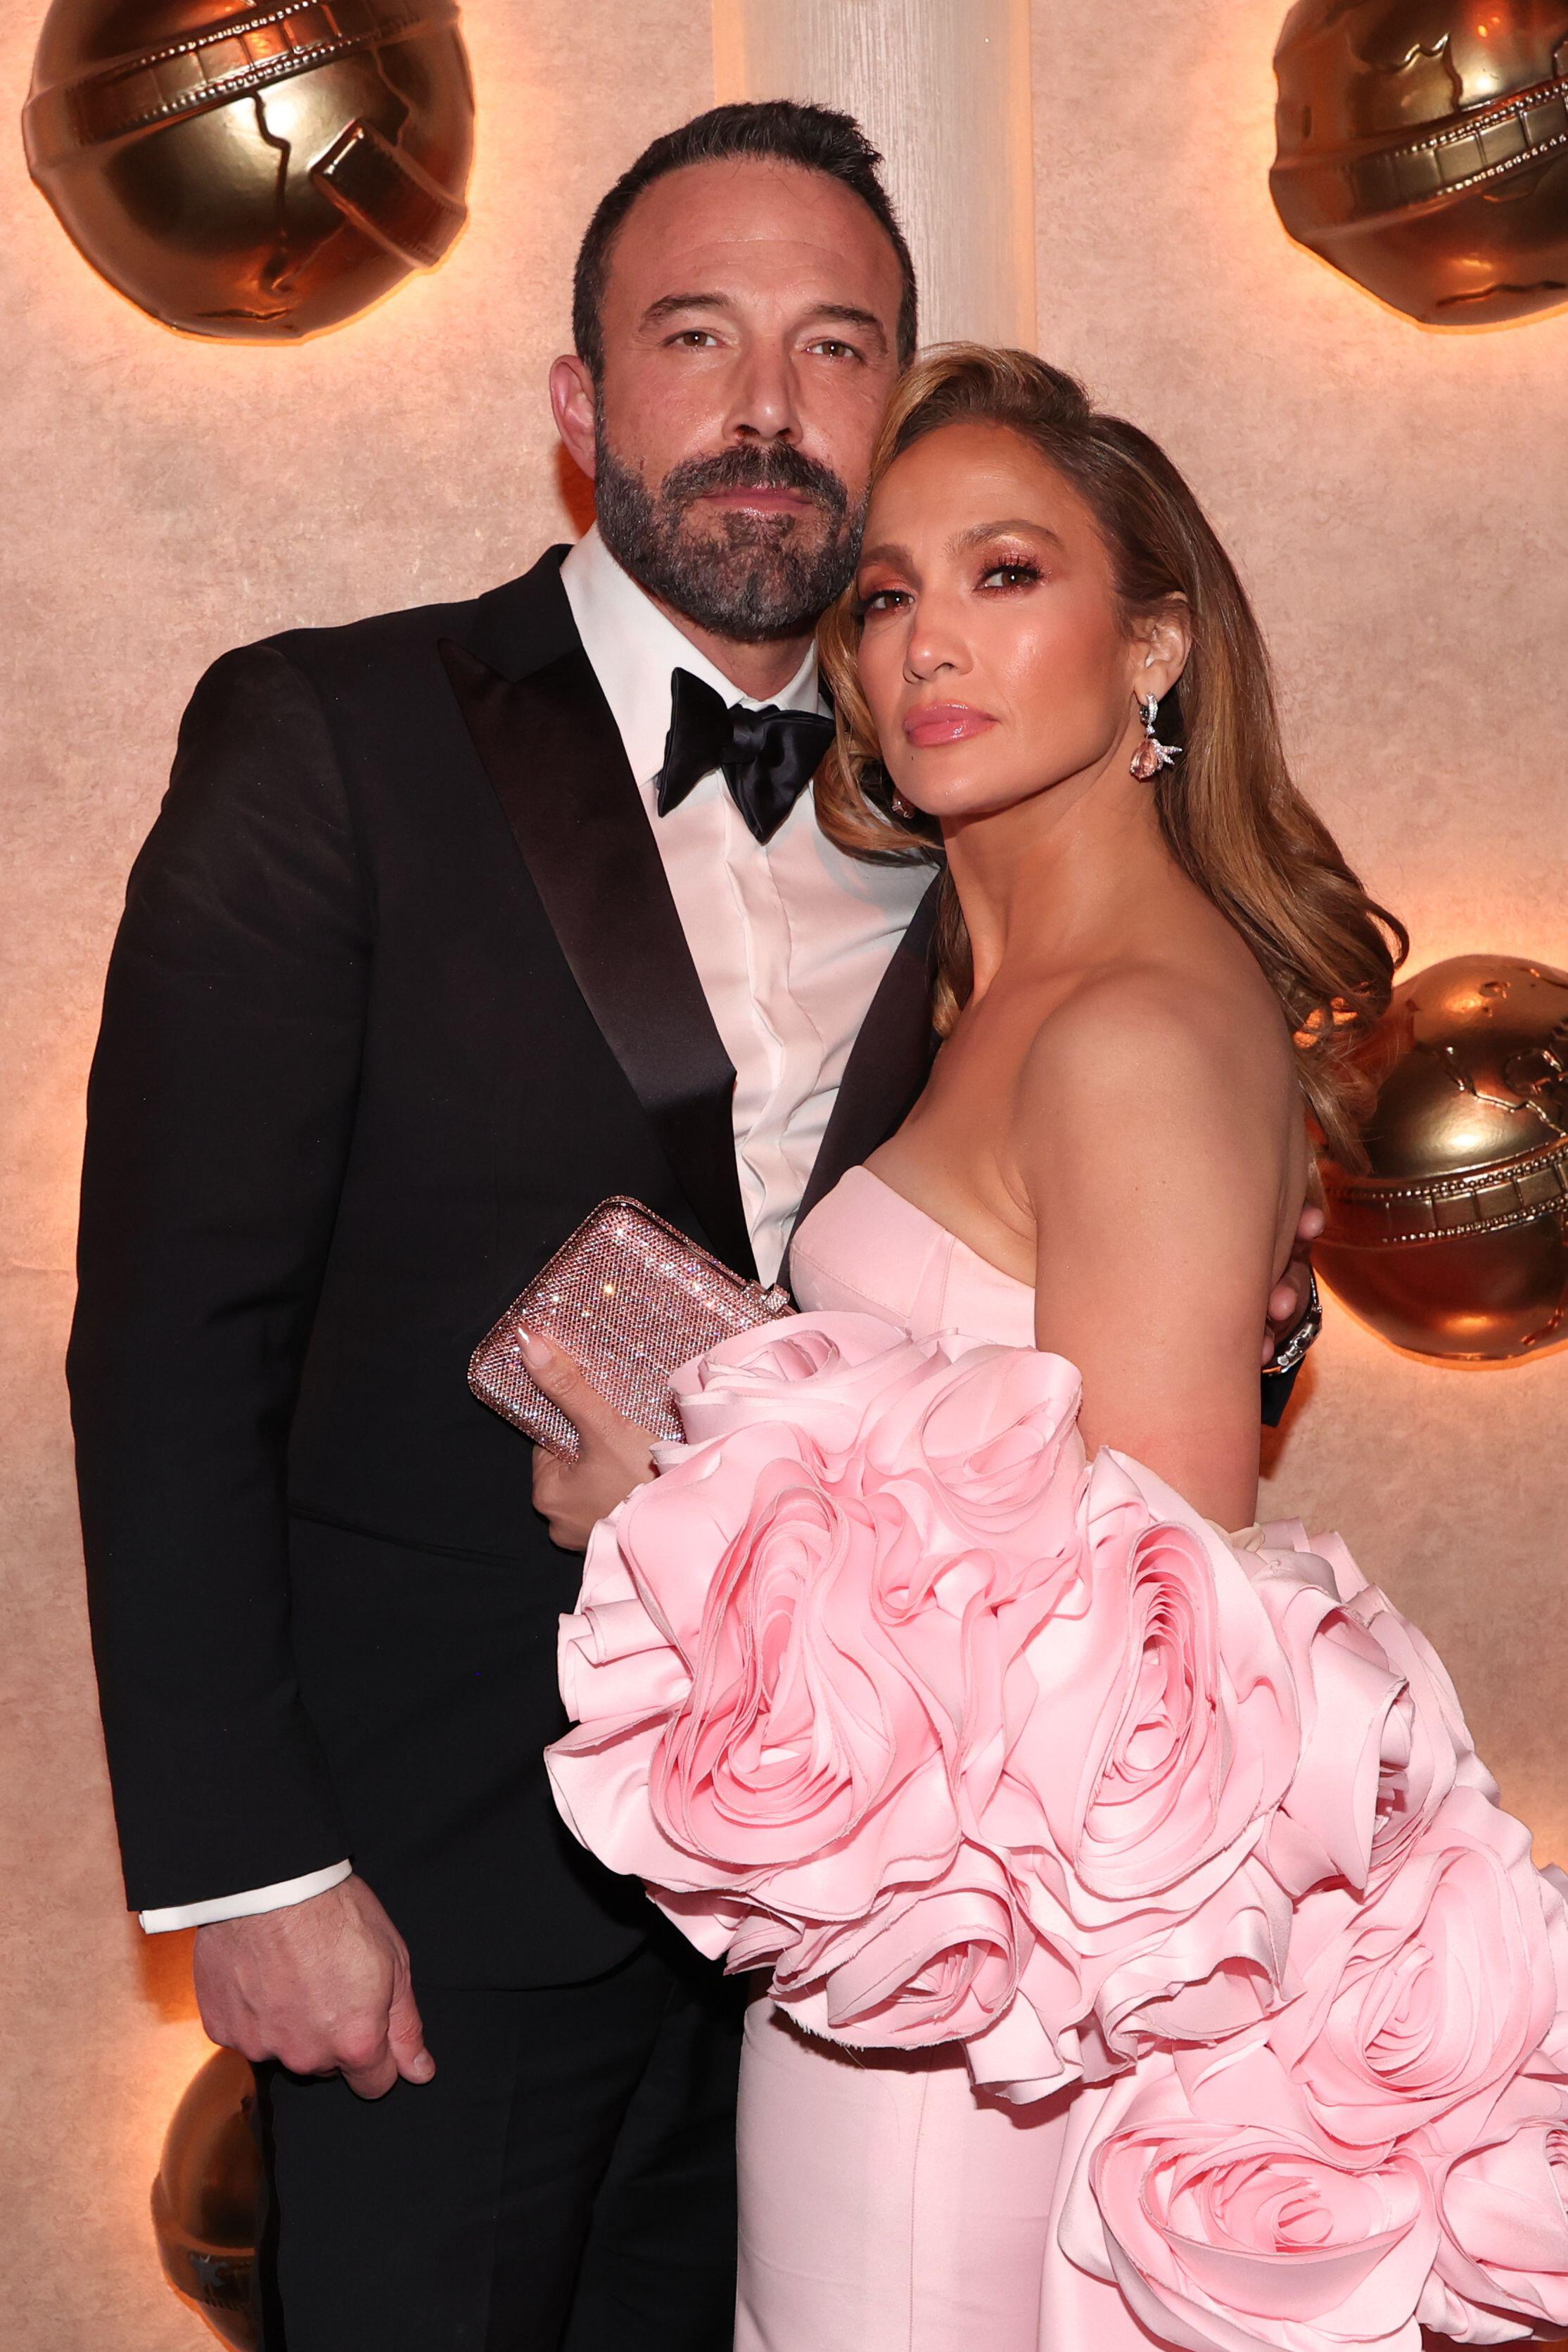 Divorce rumors have swirled after Ben reportedly moved out of the home he shares with Jennifer Lopez